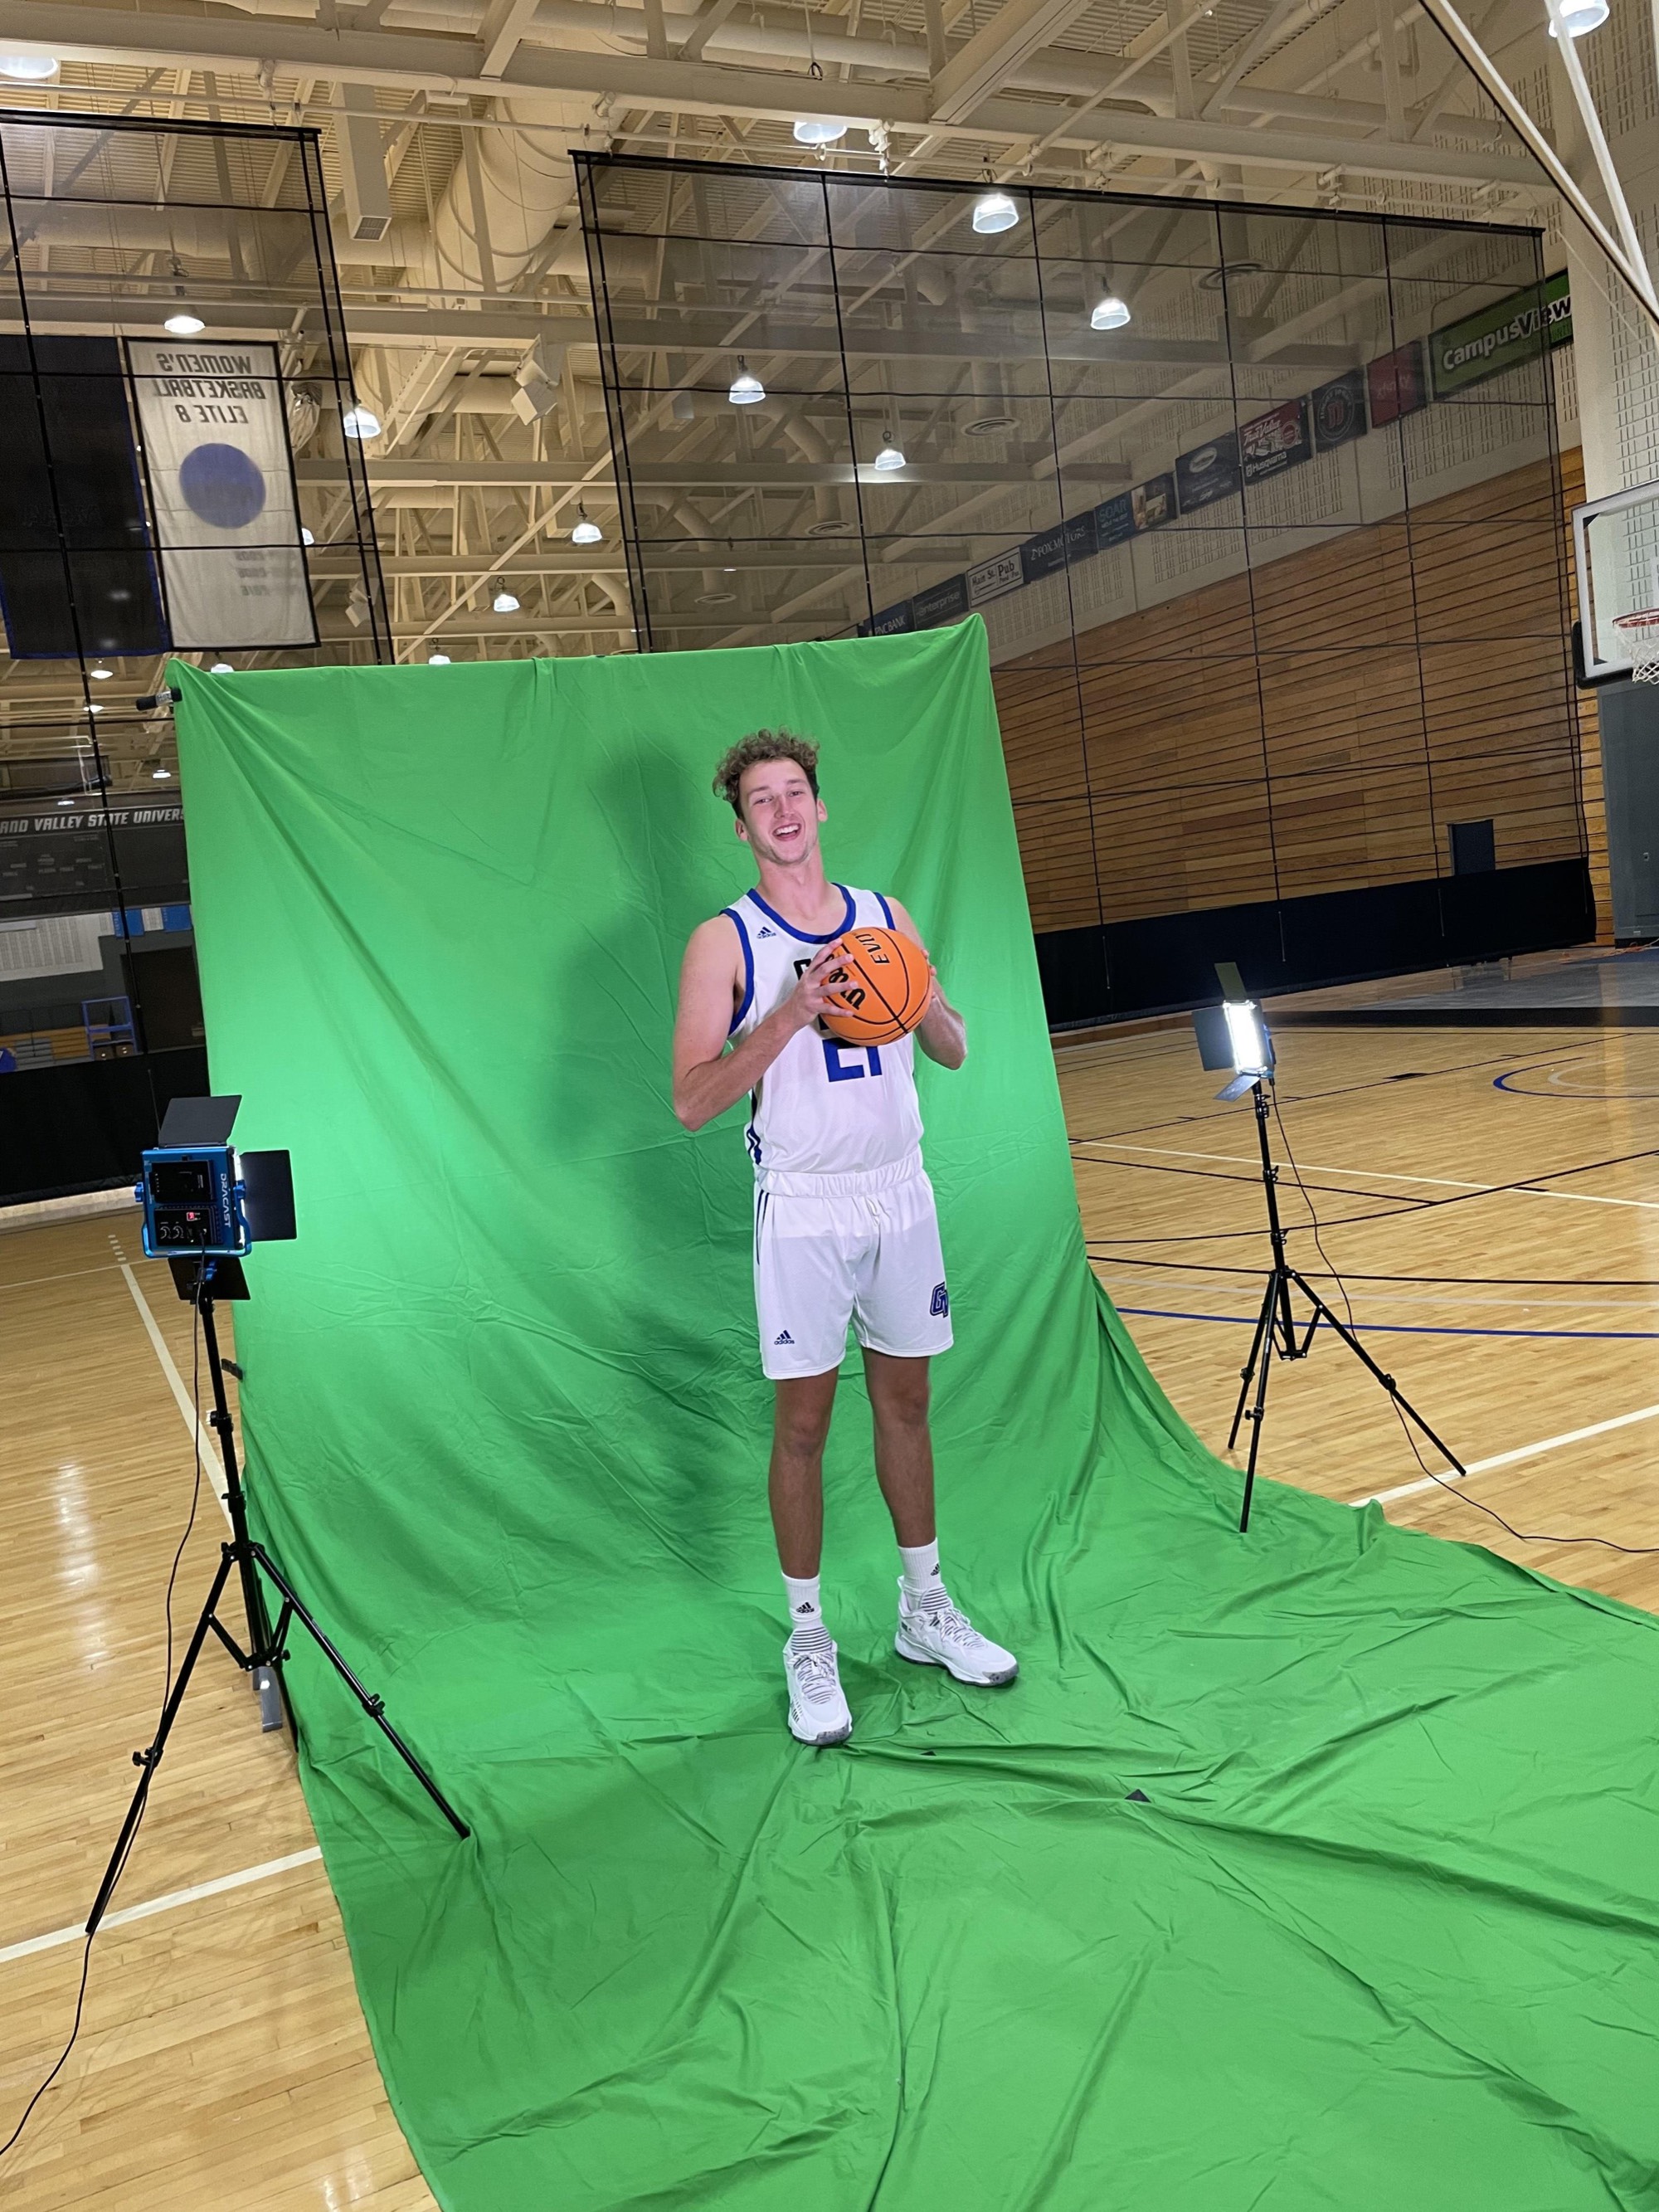 Men's basketball player wearing a white uniform holding a basketball posing on media day